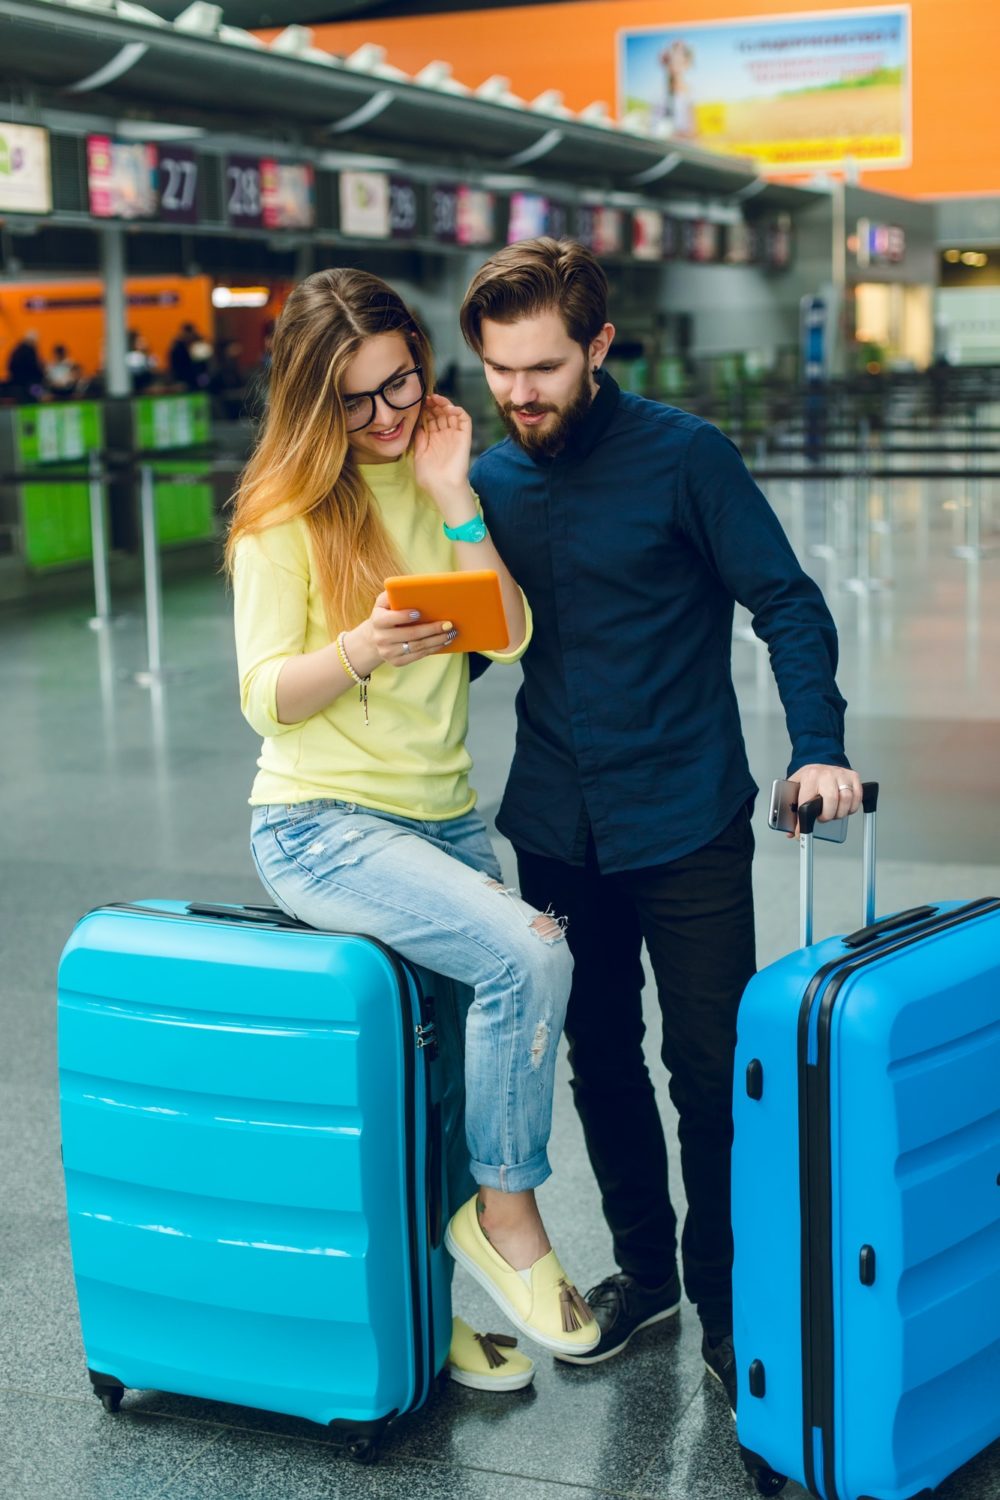 Pretty girl with long hair is sitting on suitcase in airport. Guy in shirt, pants with beard is